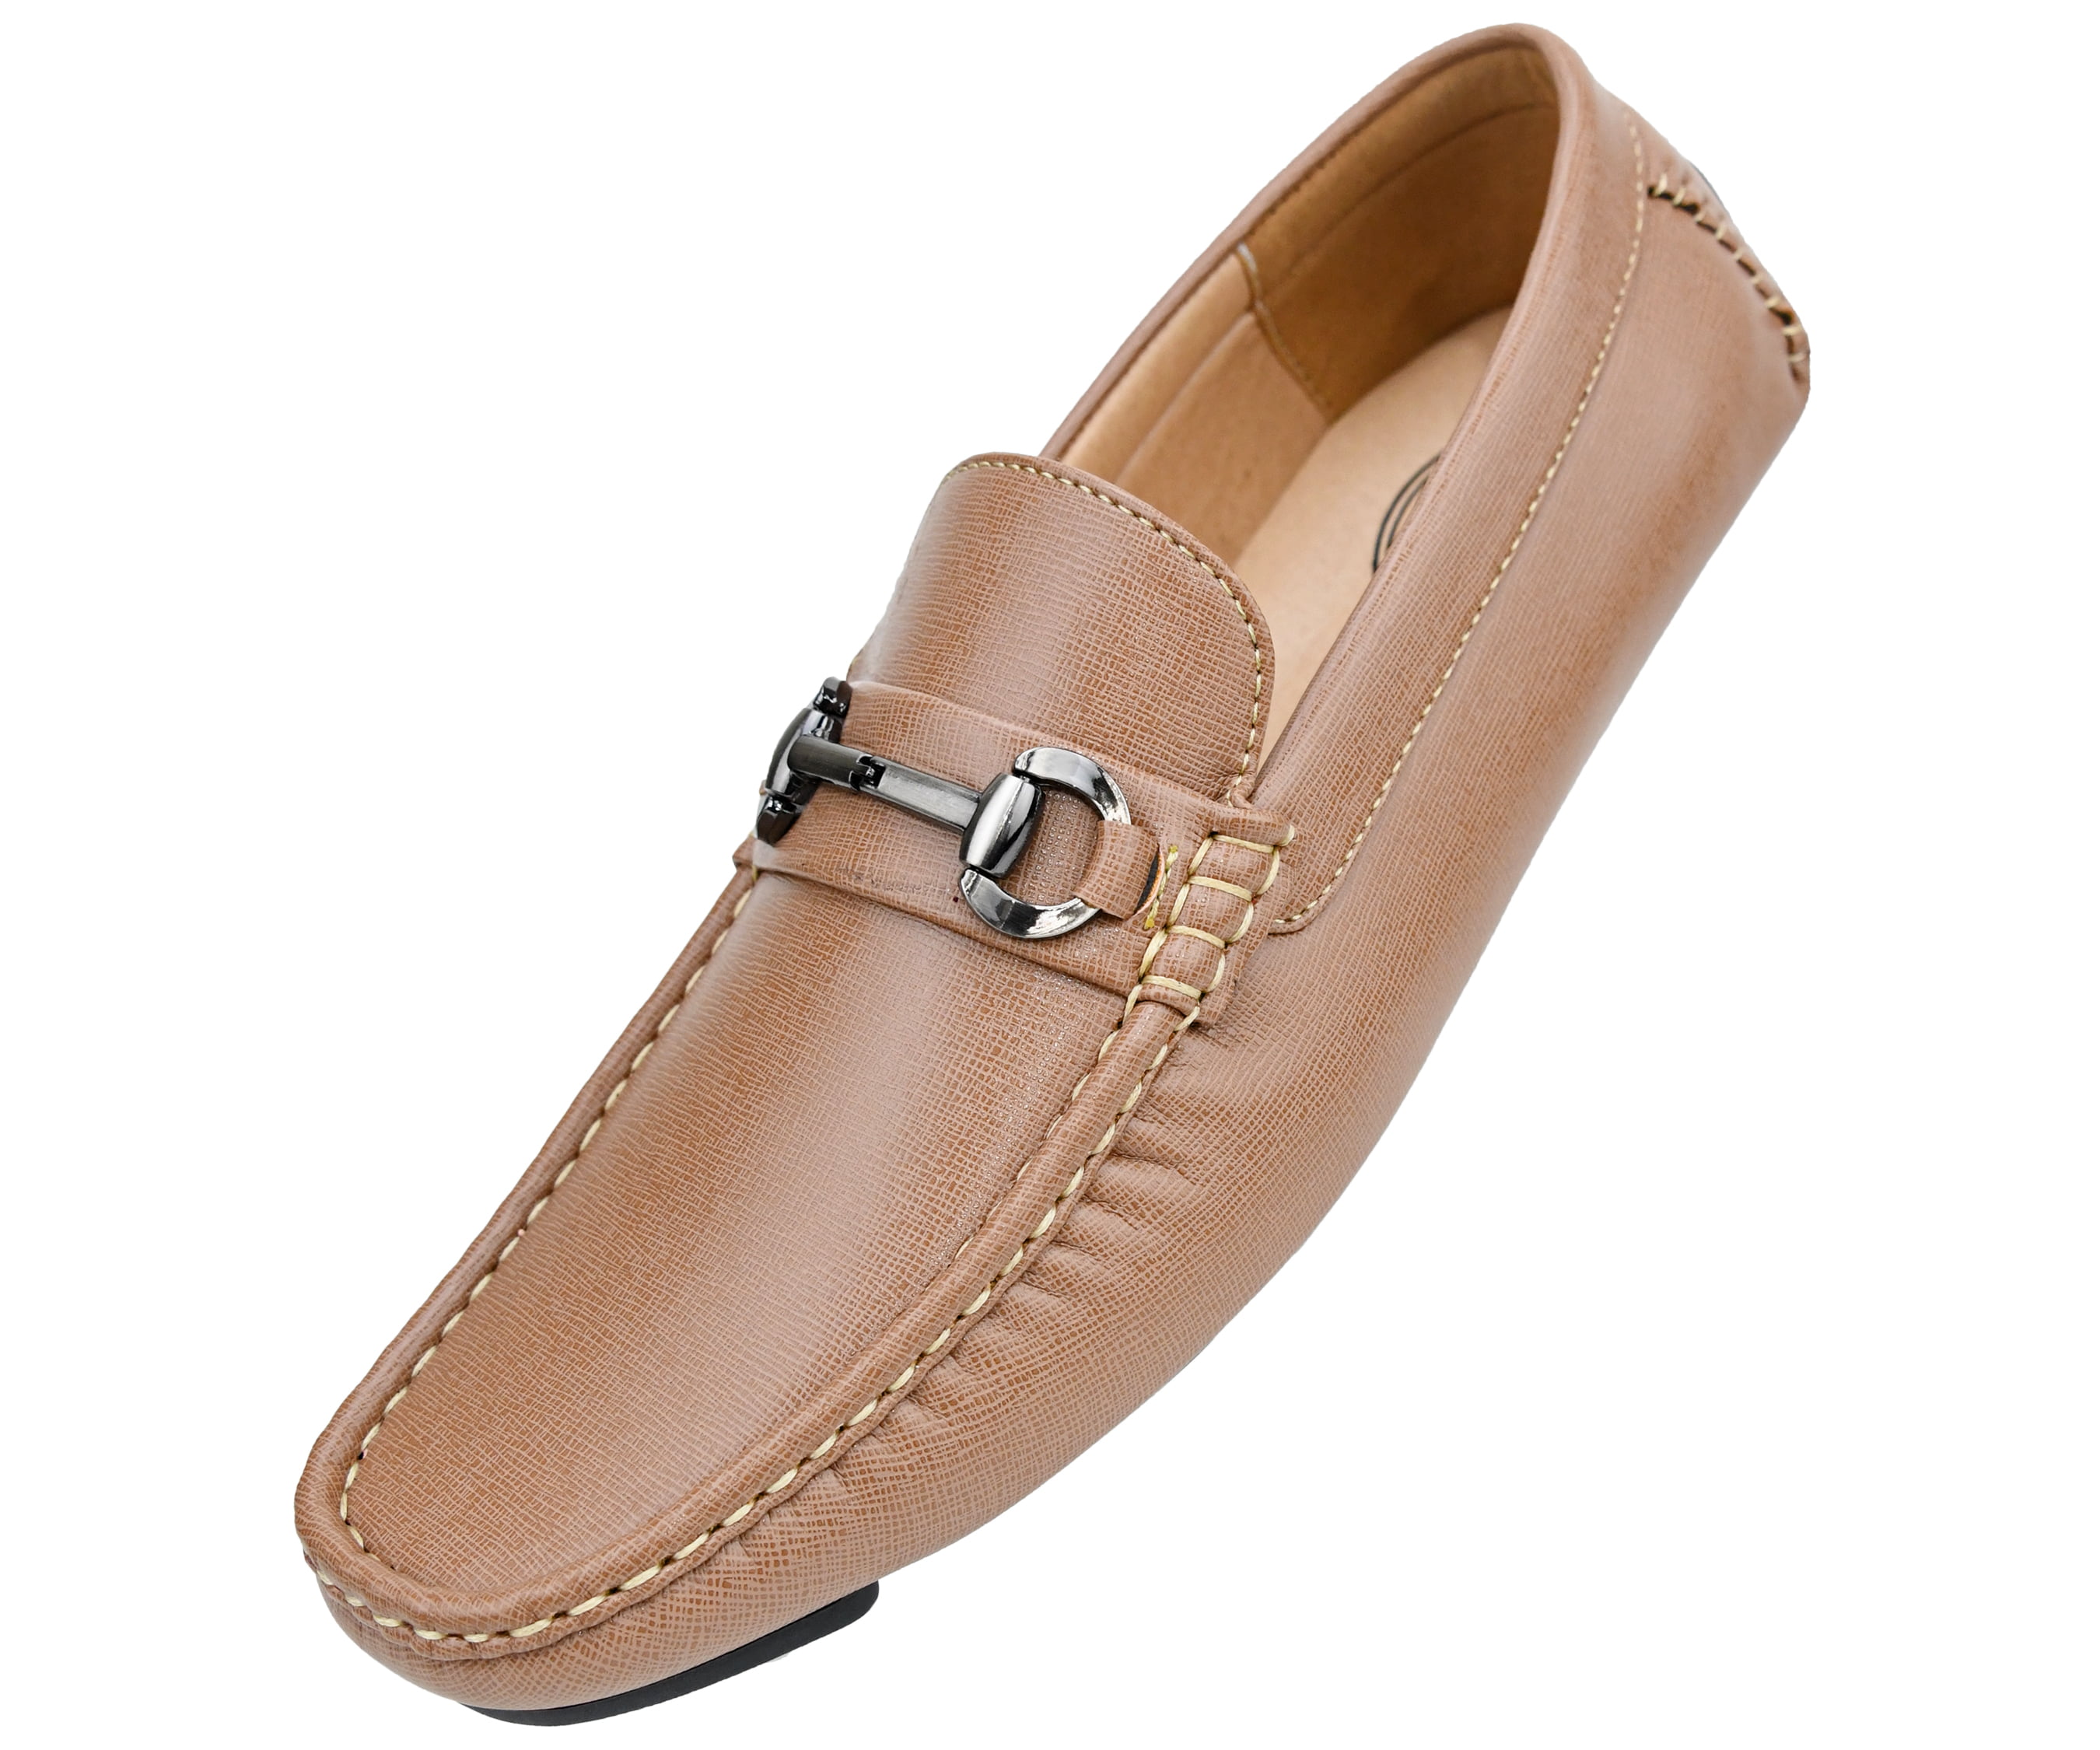 US Color : Brown, Size : 9 D Shoes Mens Mens Casual Driving Loafer Fashion Oxfords with Metal Buckle Flat Dress Shoes Comfortable Penny Slip-on Boat Shoes Weaving Comfortable M 